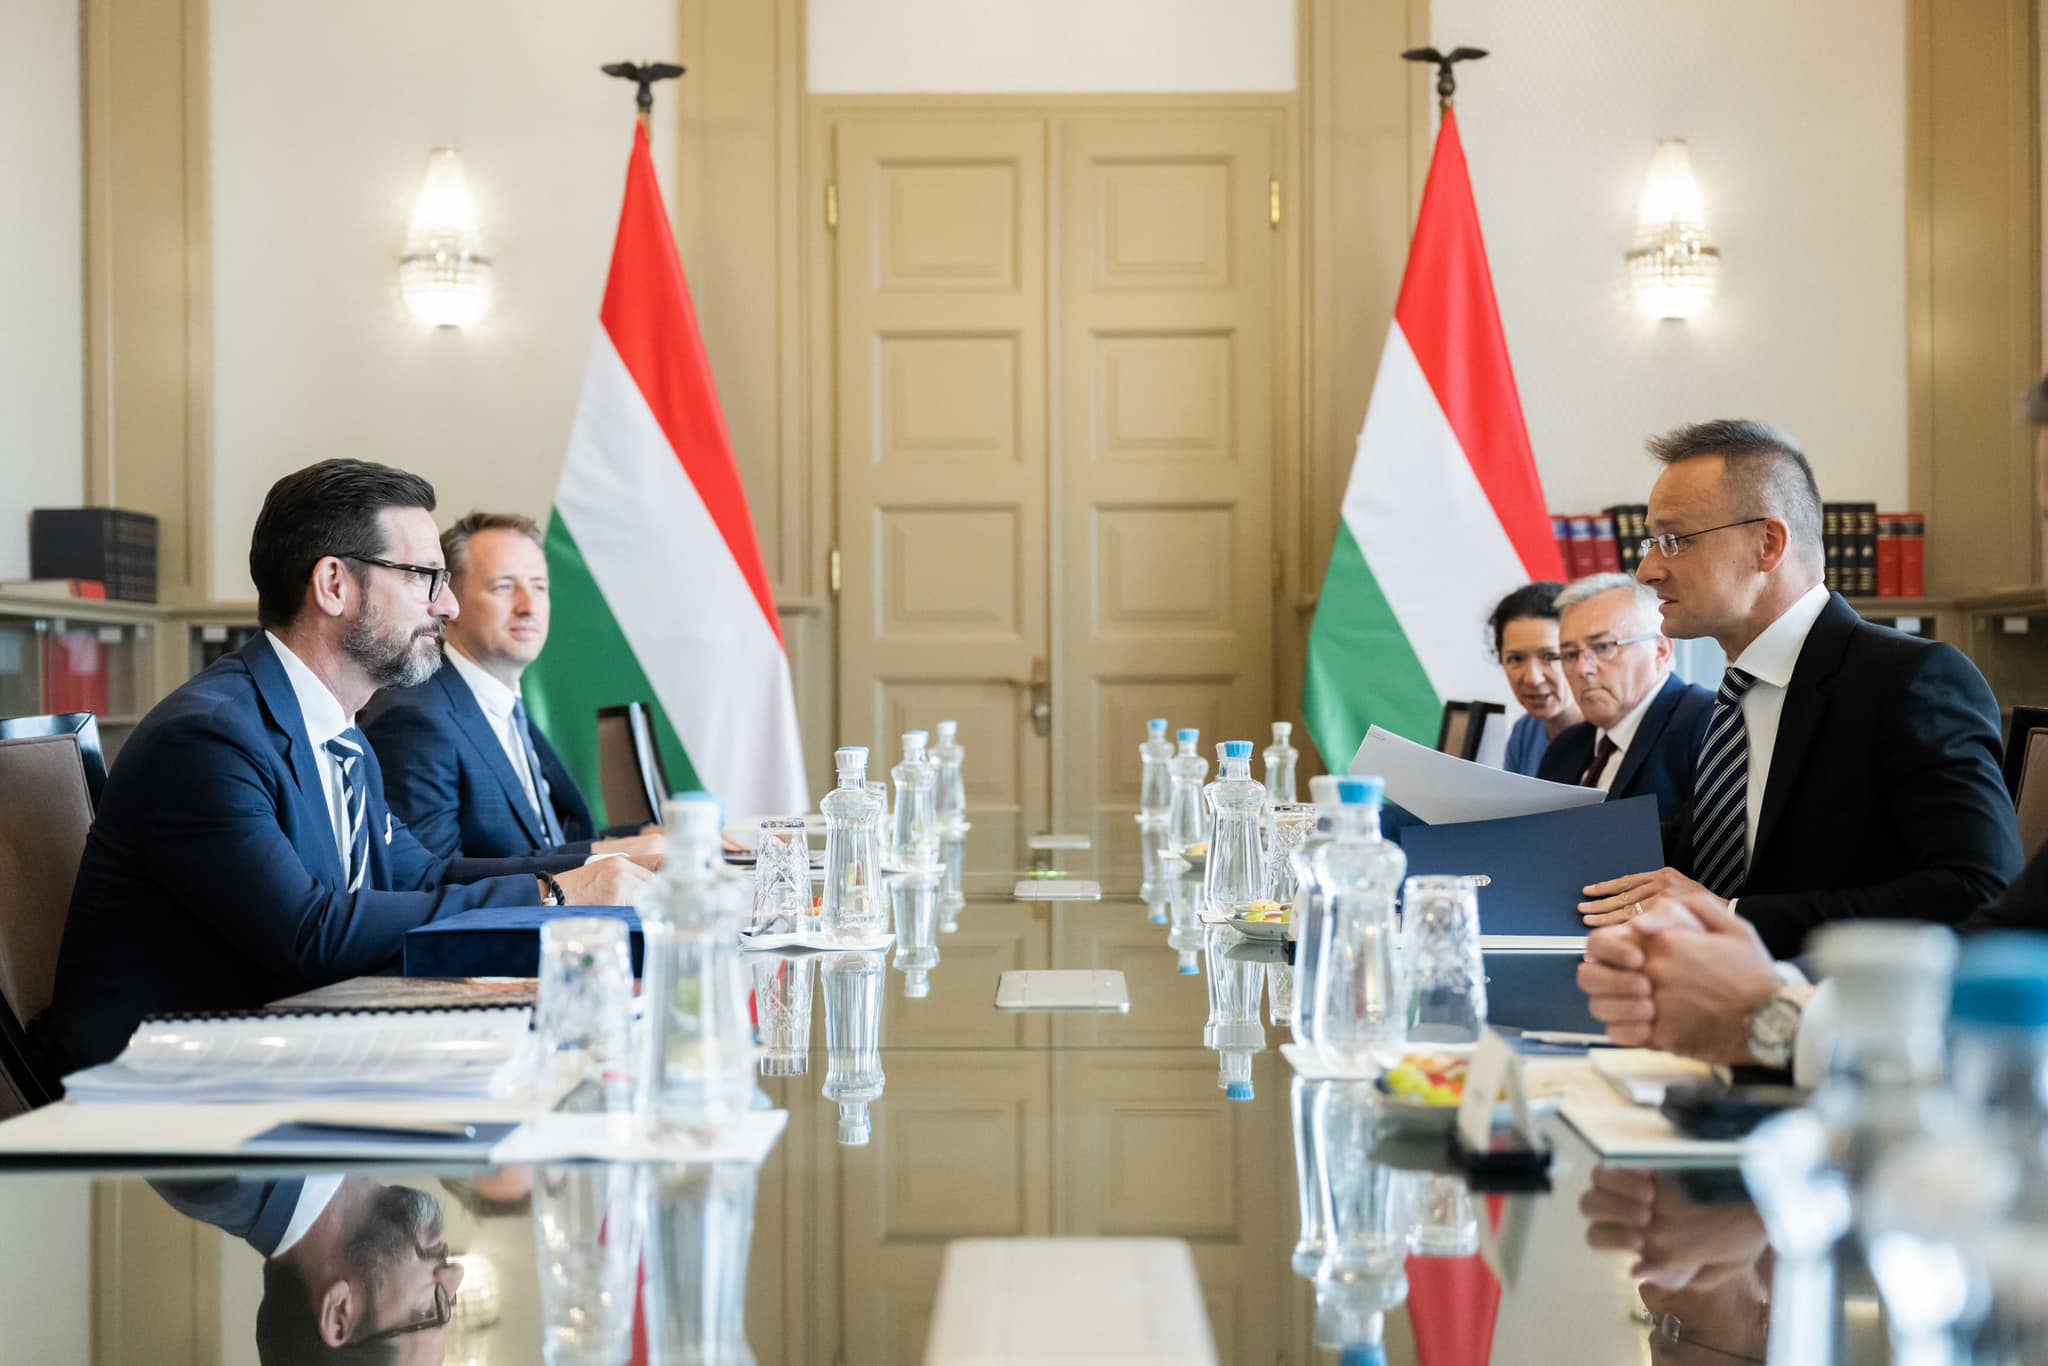 “Huge Record”: Hungary Received 6.5 Billion Euros in Foreign Investment